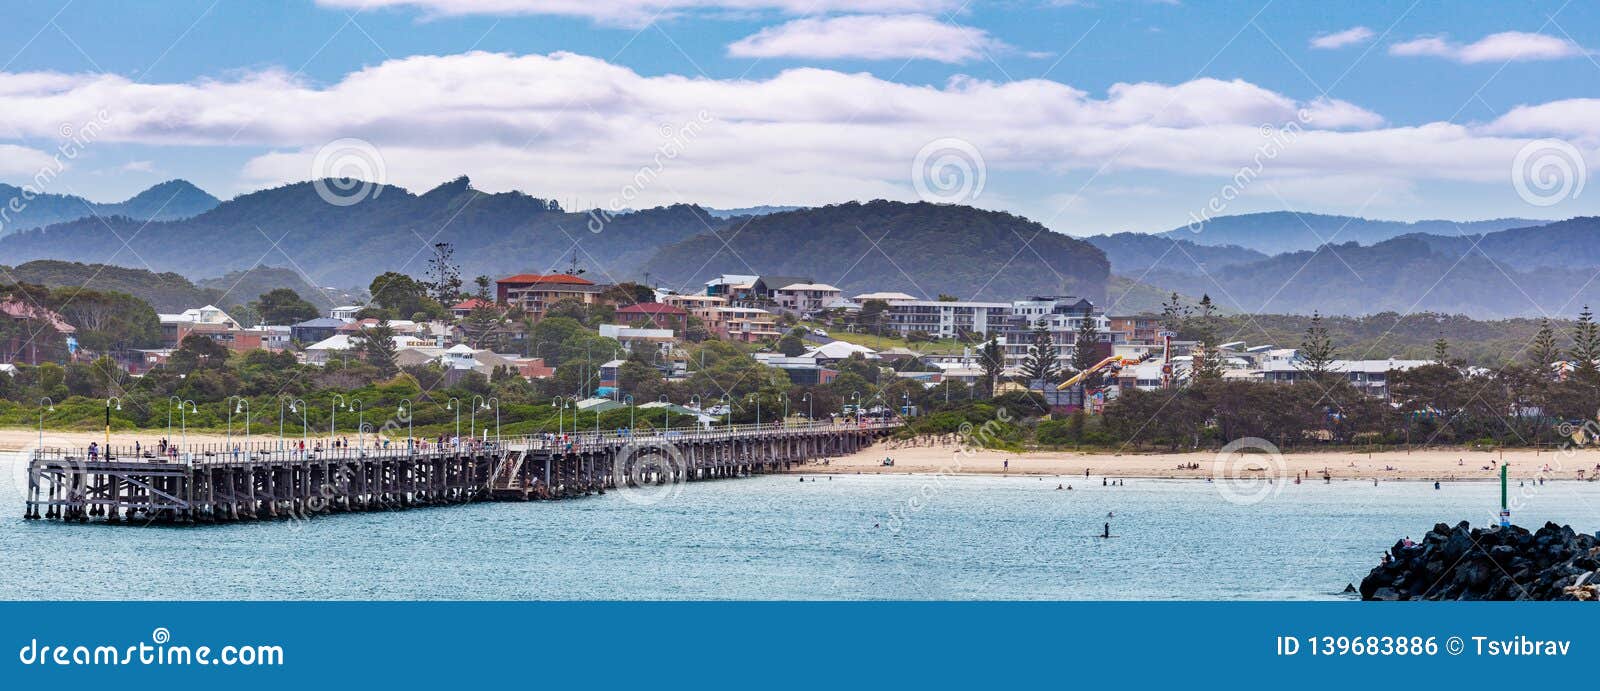 coffs harbour jetty and luxury real estate.